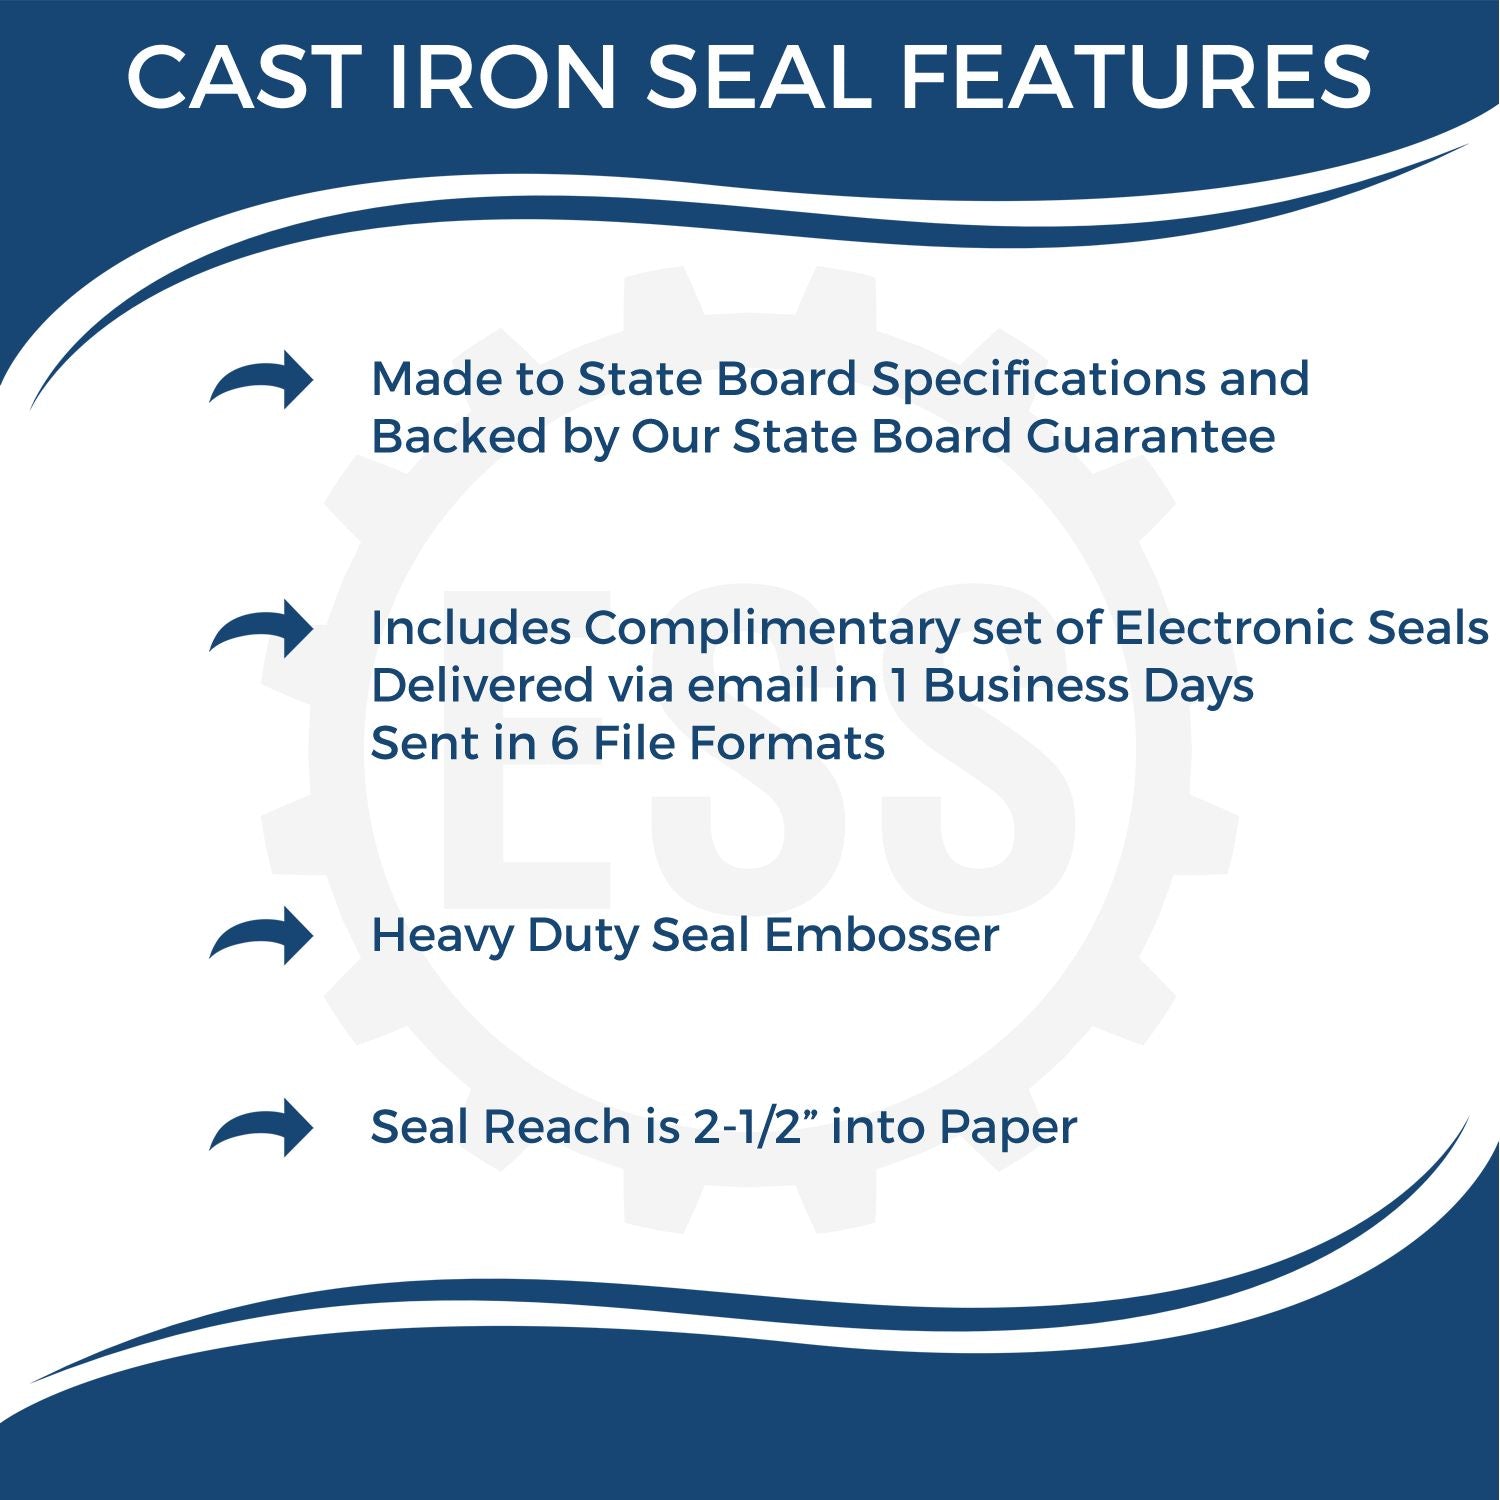 The main image for the Heavy Duty Cast Iron Nevada Engineer Seal Embosser depicting a sample of the imprint and electronic files